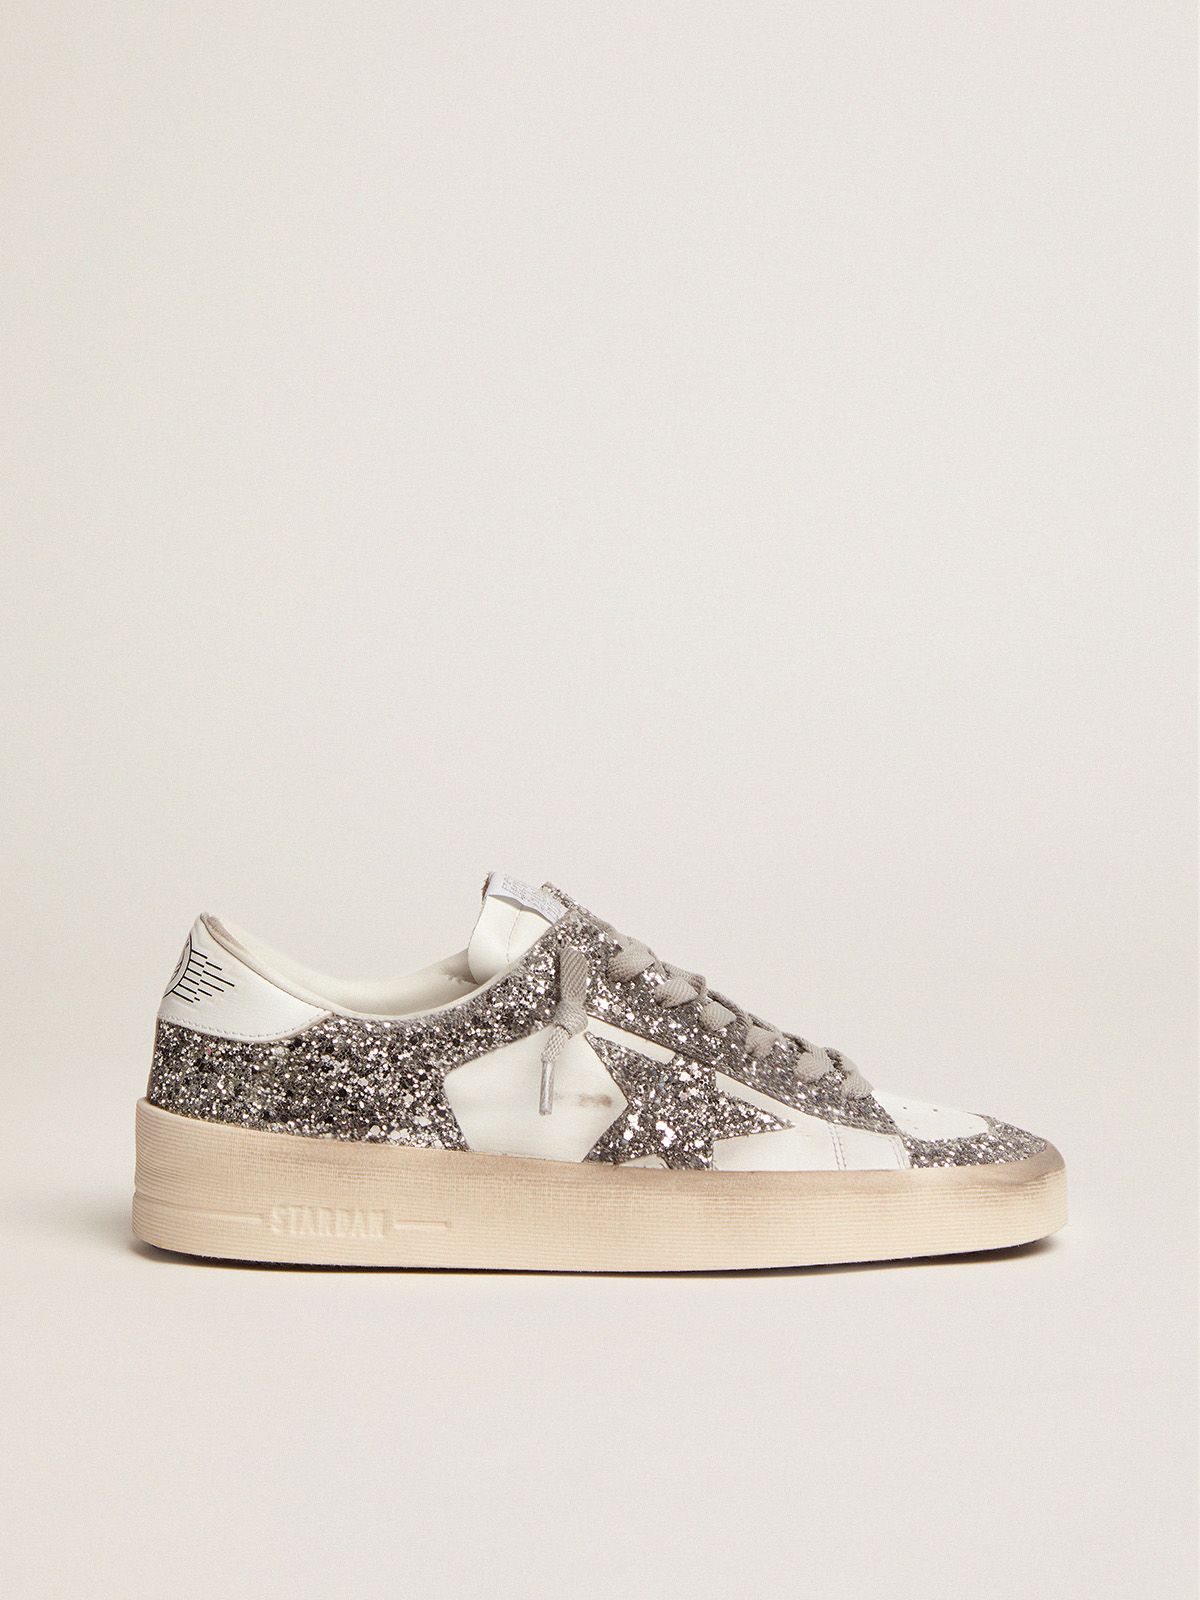 golden goose in white Stardan leather silver sneakers glitter and